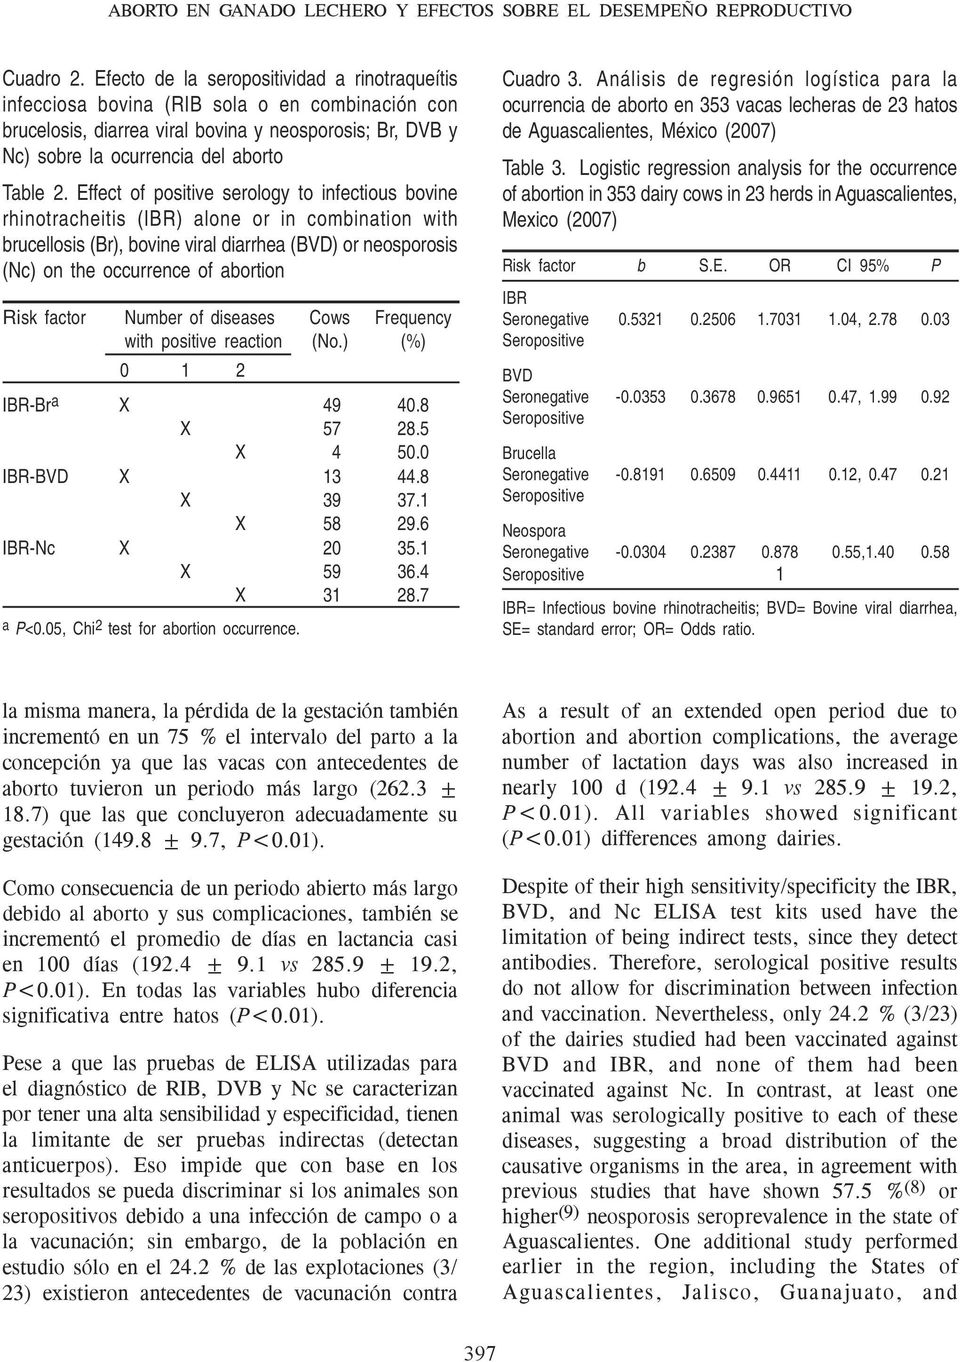 Effect of positive serology to infectious bovine rhinotracheitis (IBR) alone or in combination with brucellosis (Br), bovine viral diarrhea (BVD) or neosporosis (Nc) on the occurrence of abortion